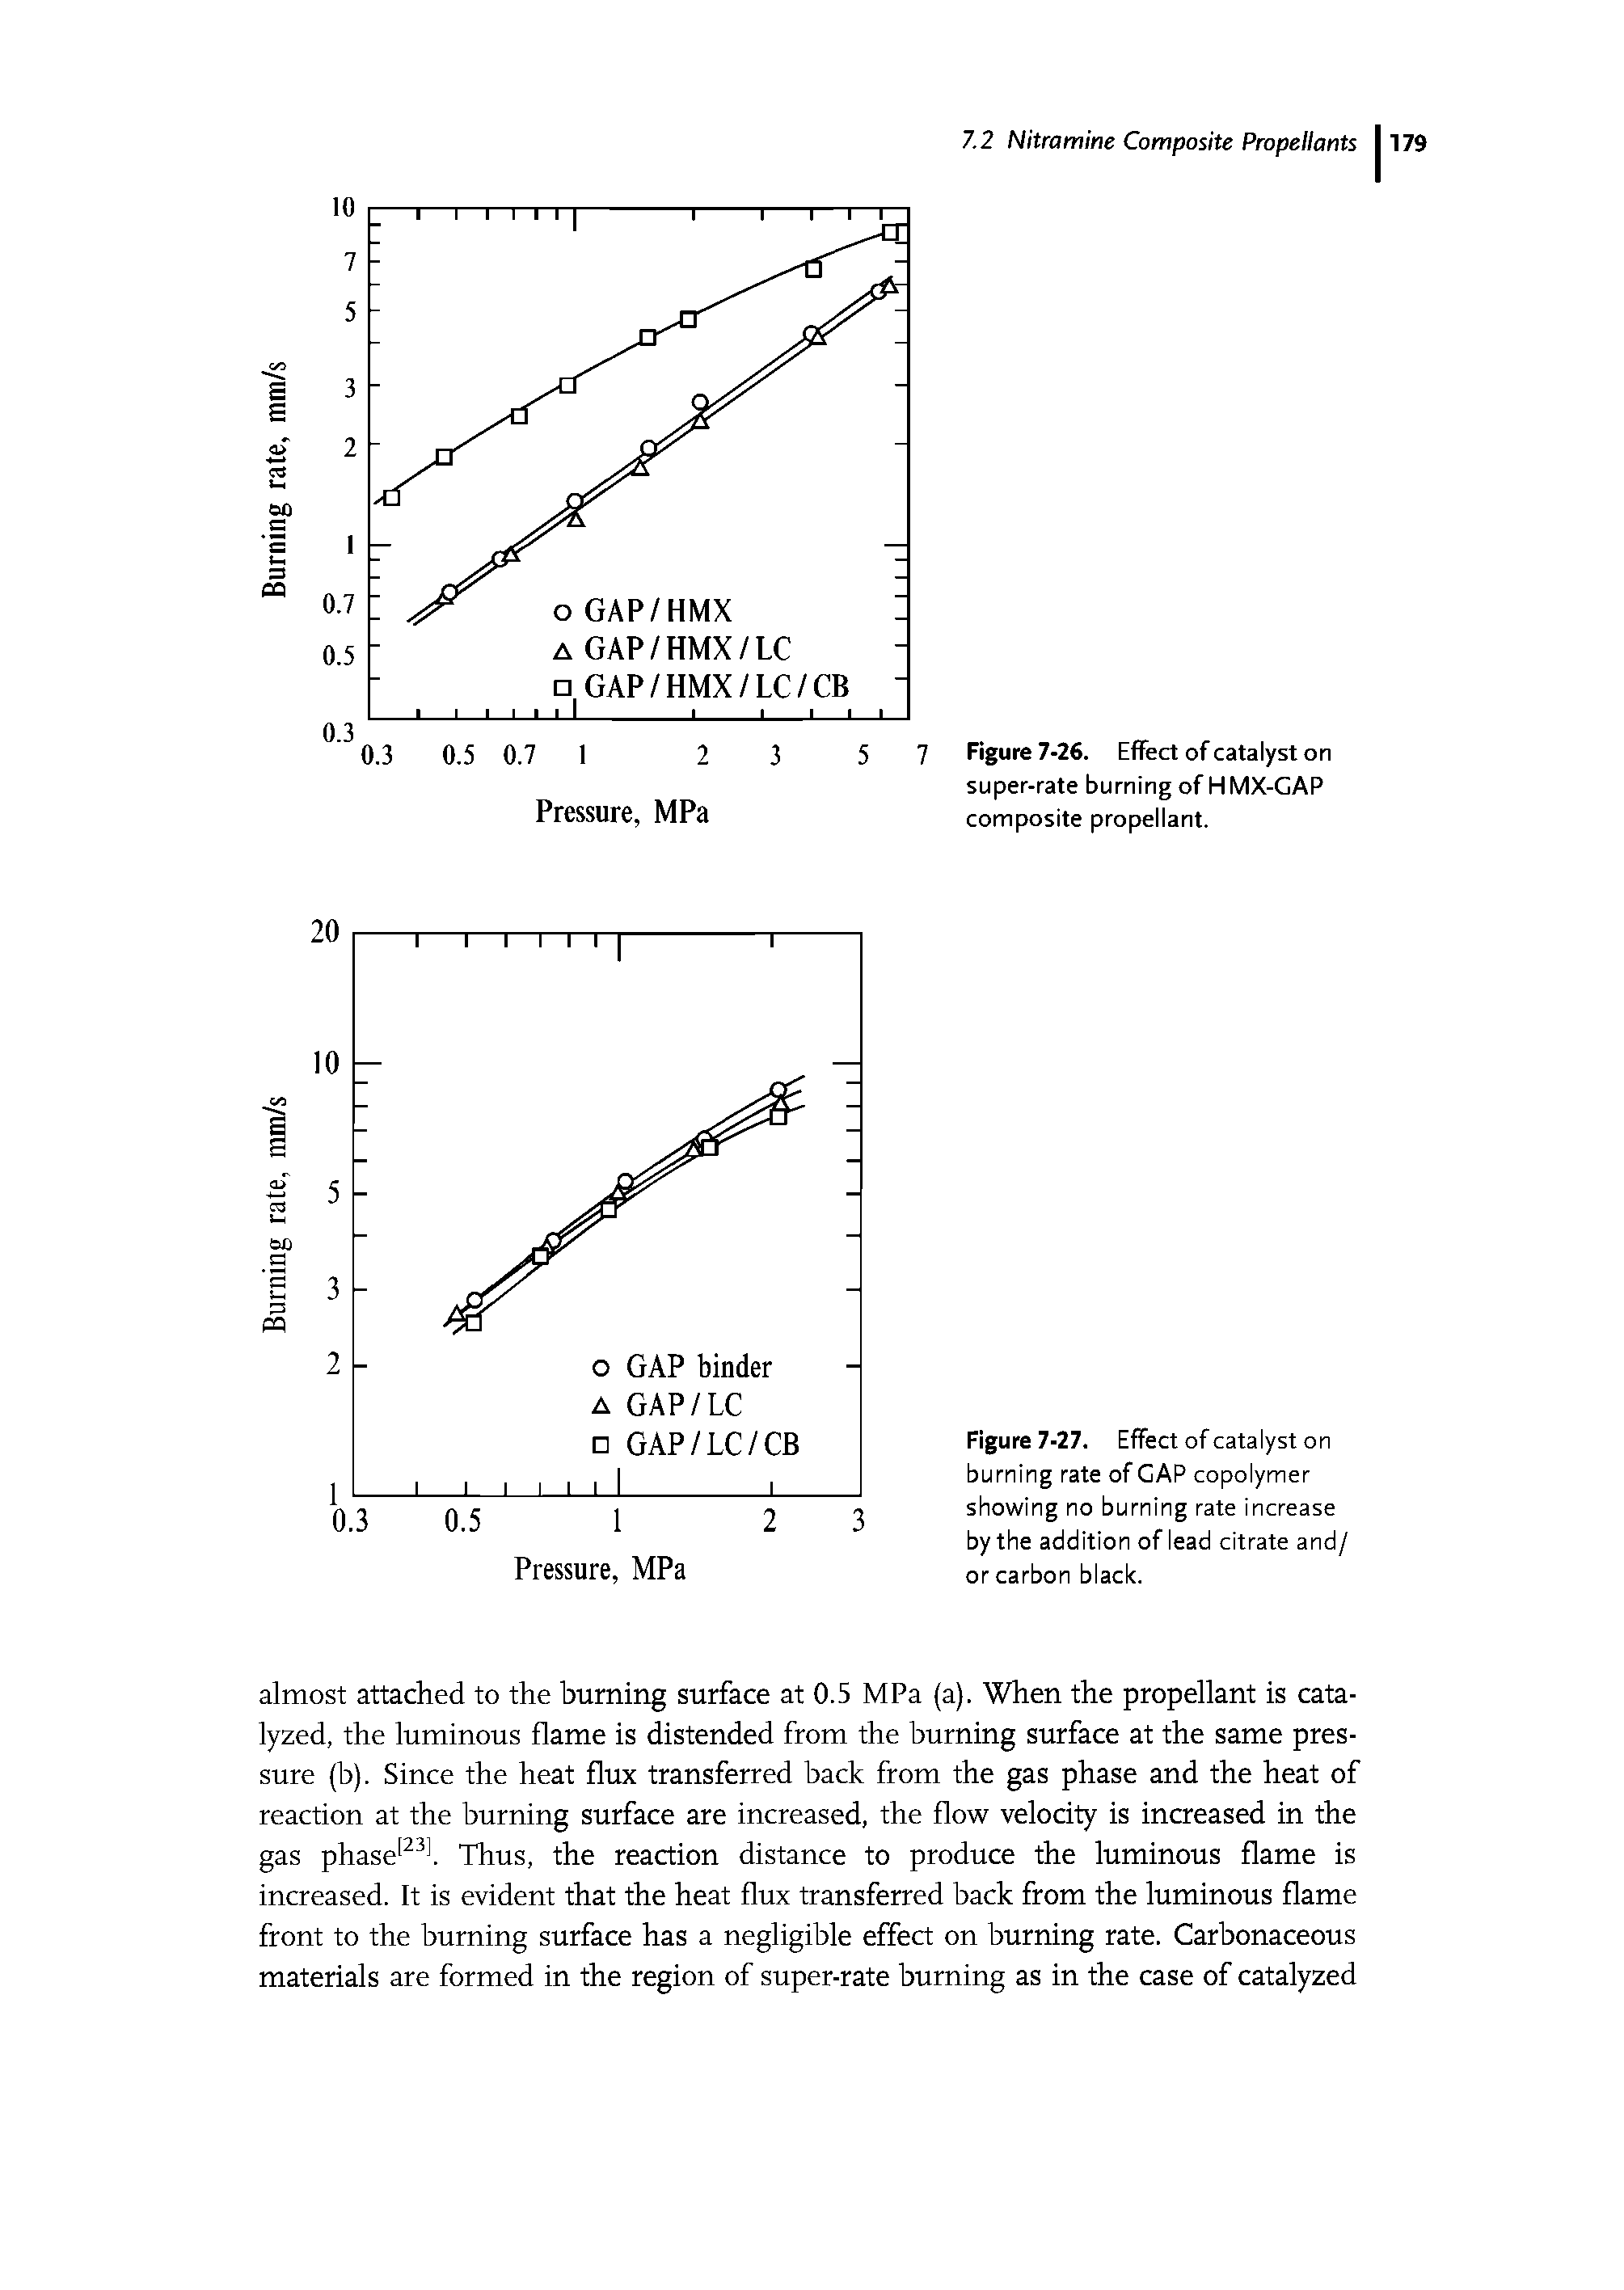 Figure 7-26. Effect of catalyst on super-rate burning of HMX-GAP composite propellant.